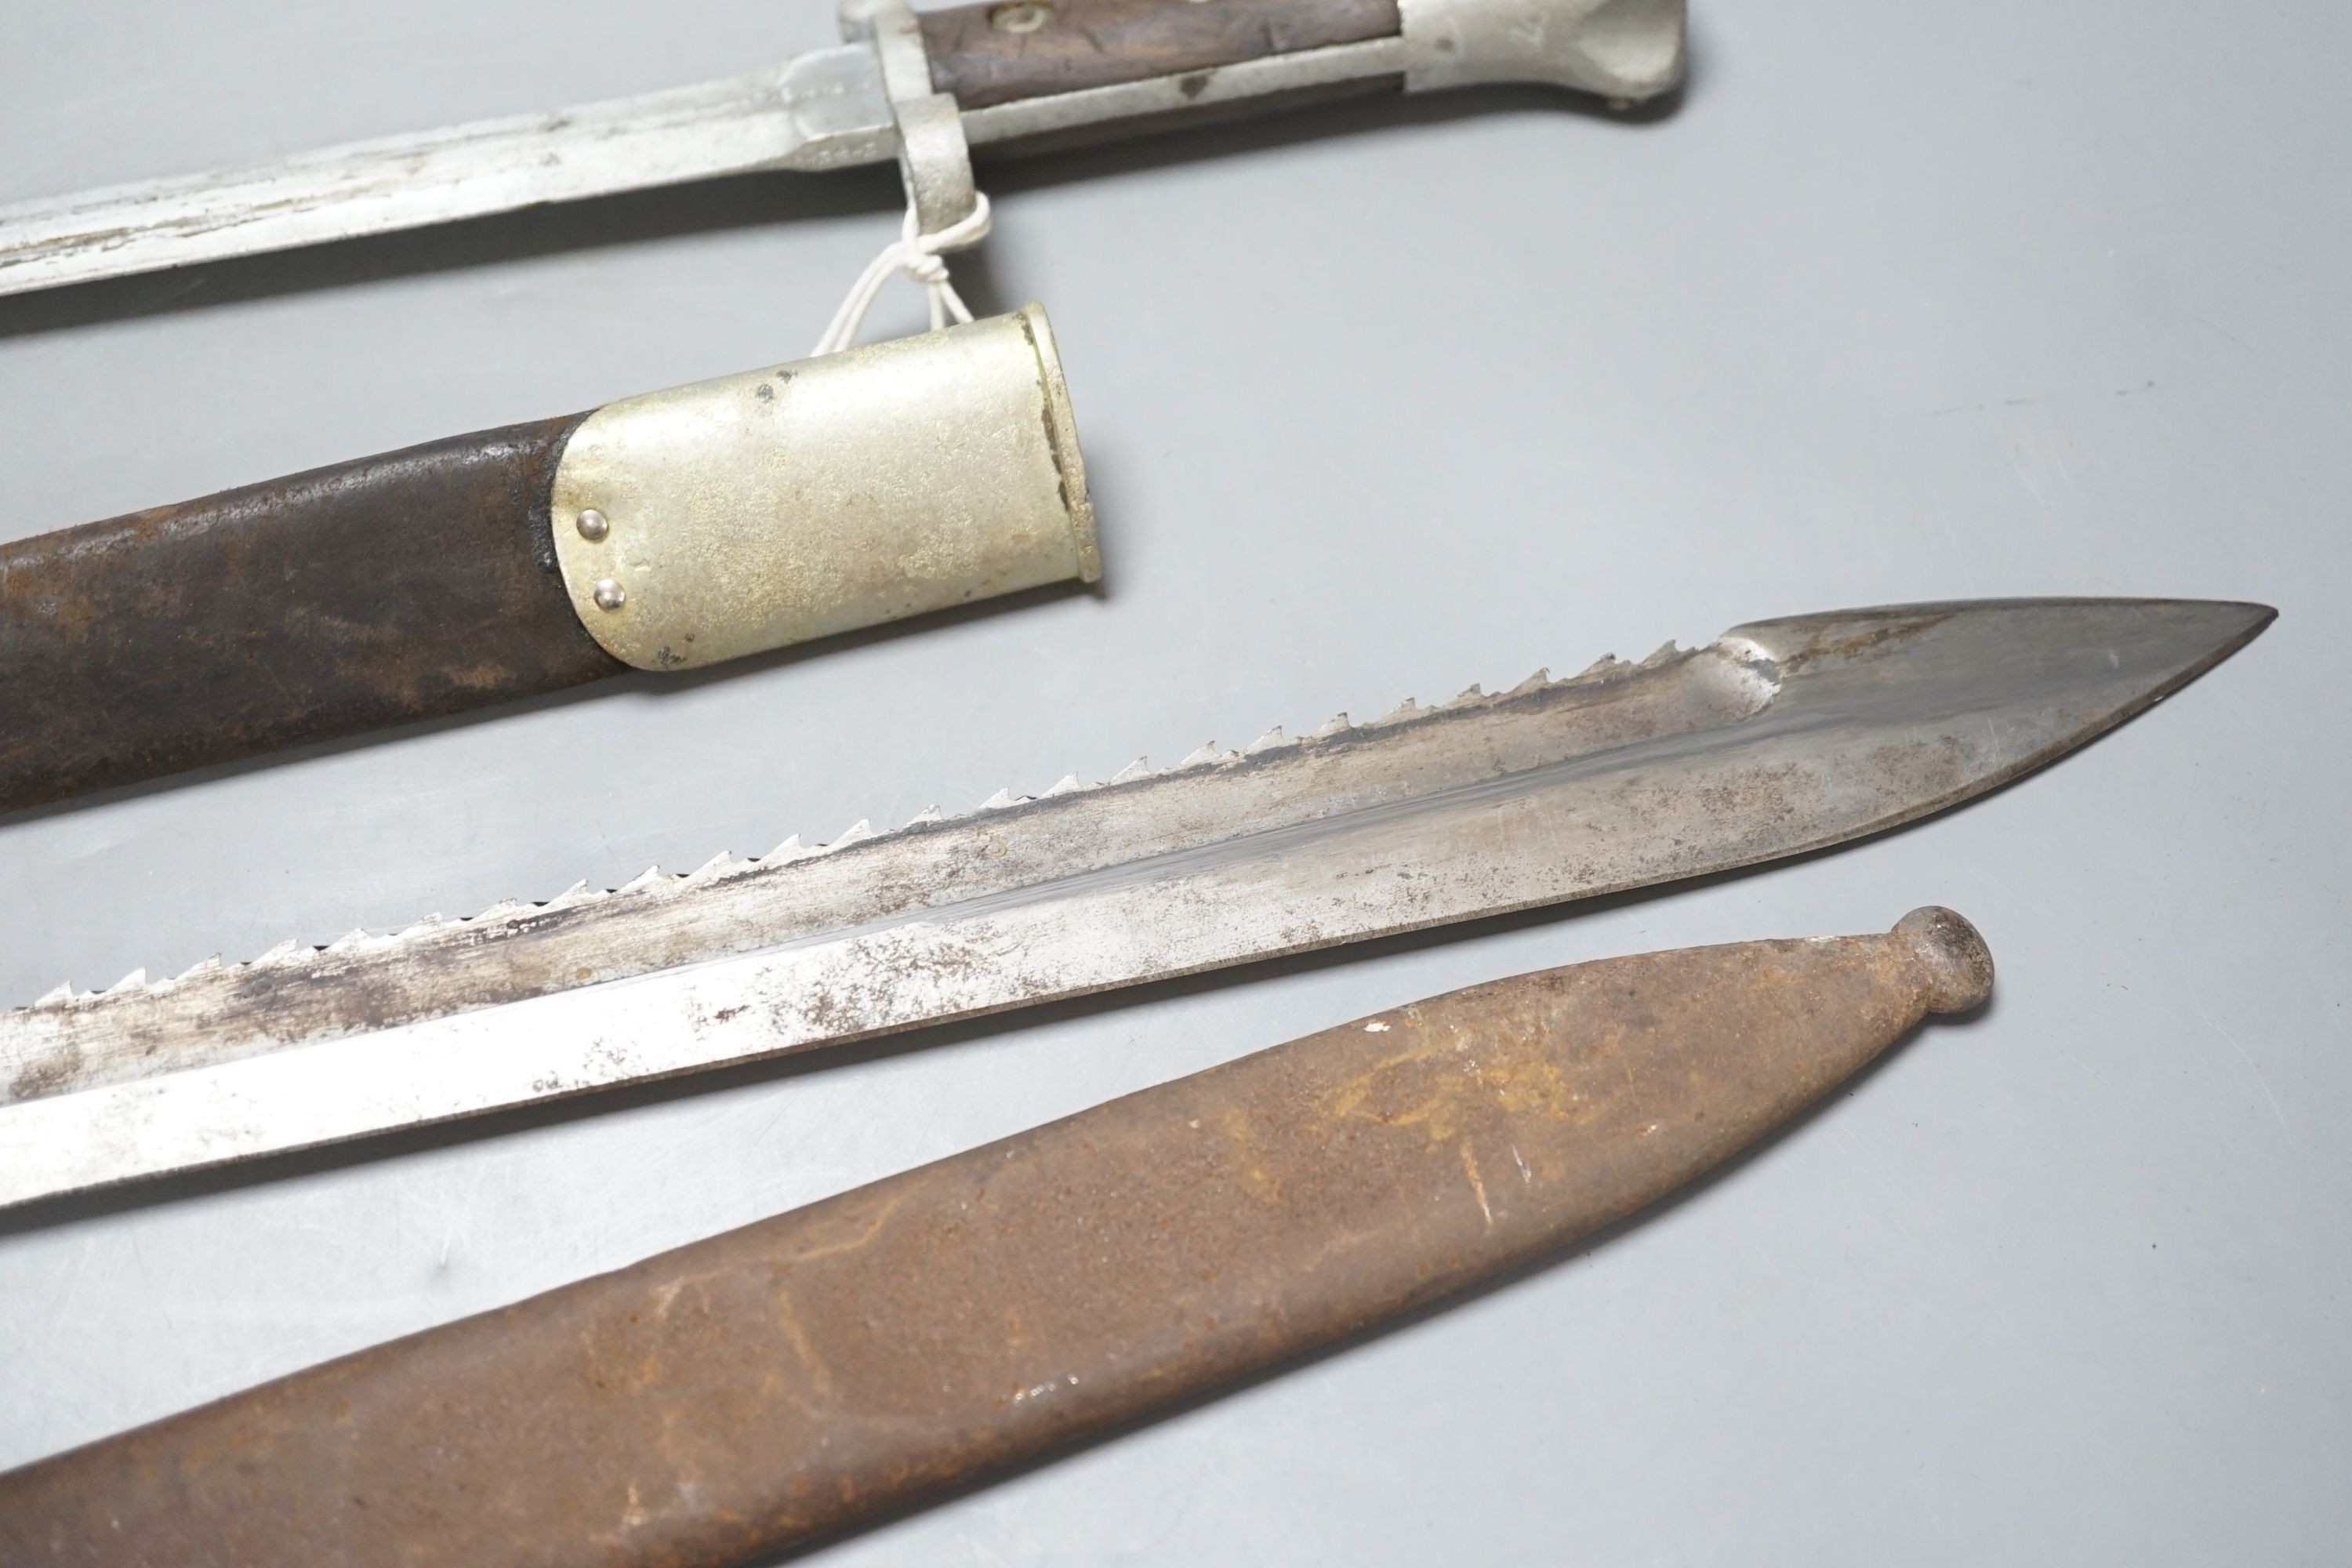 A German bayonet and another